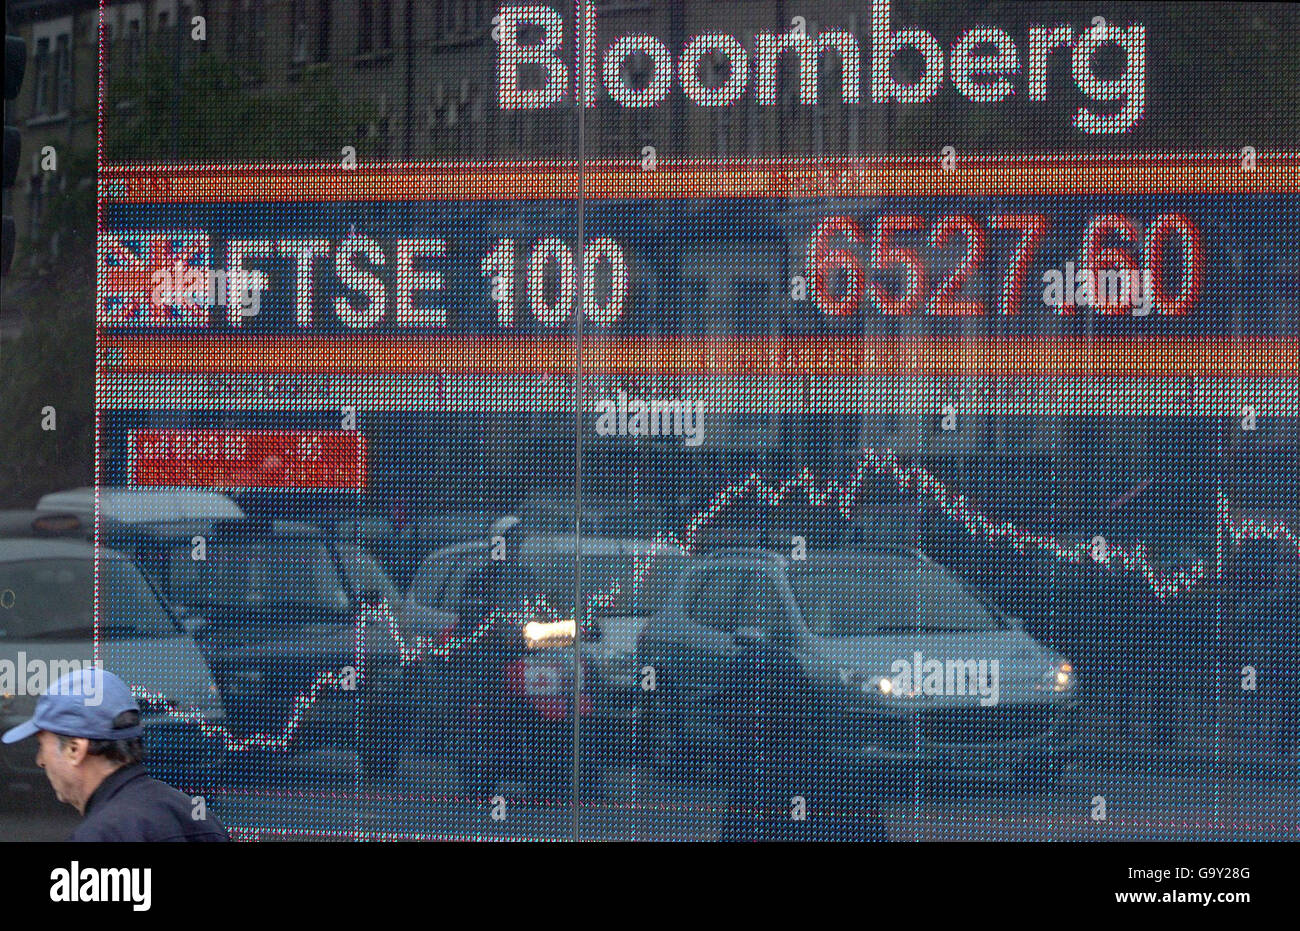 The Bloomberg electronic board in west London shows market information. Stock Photo